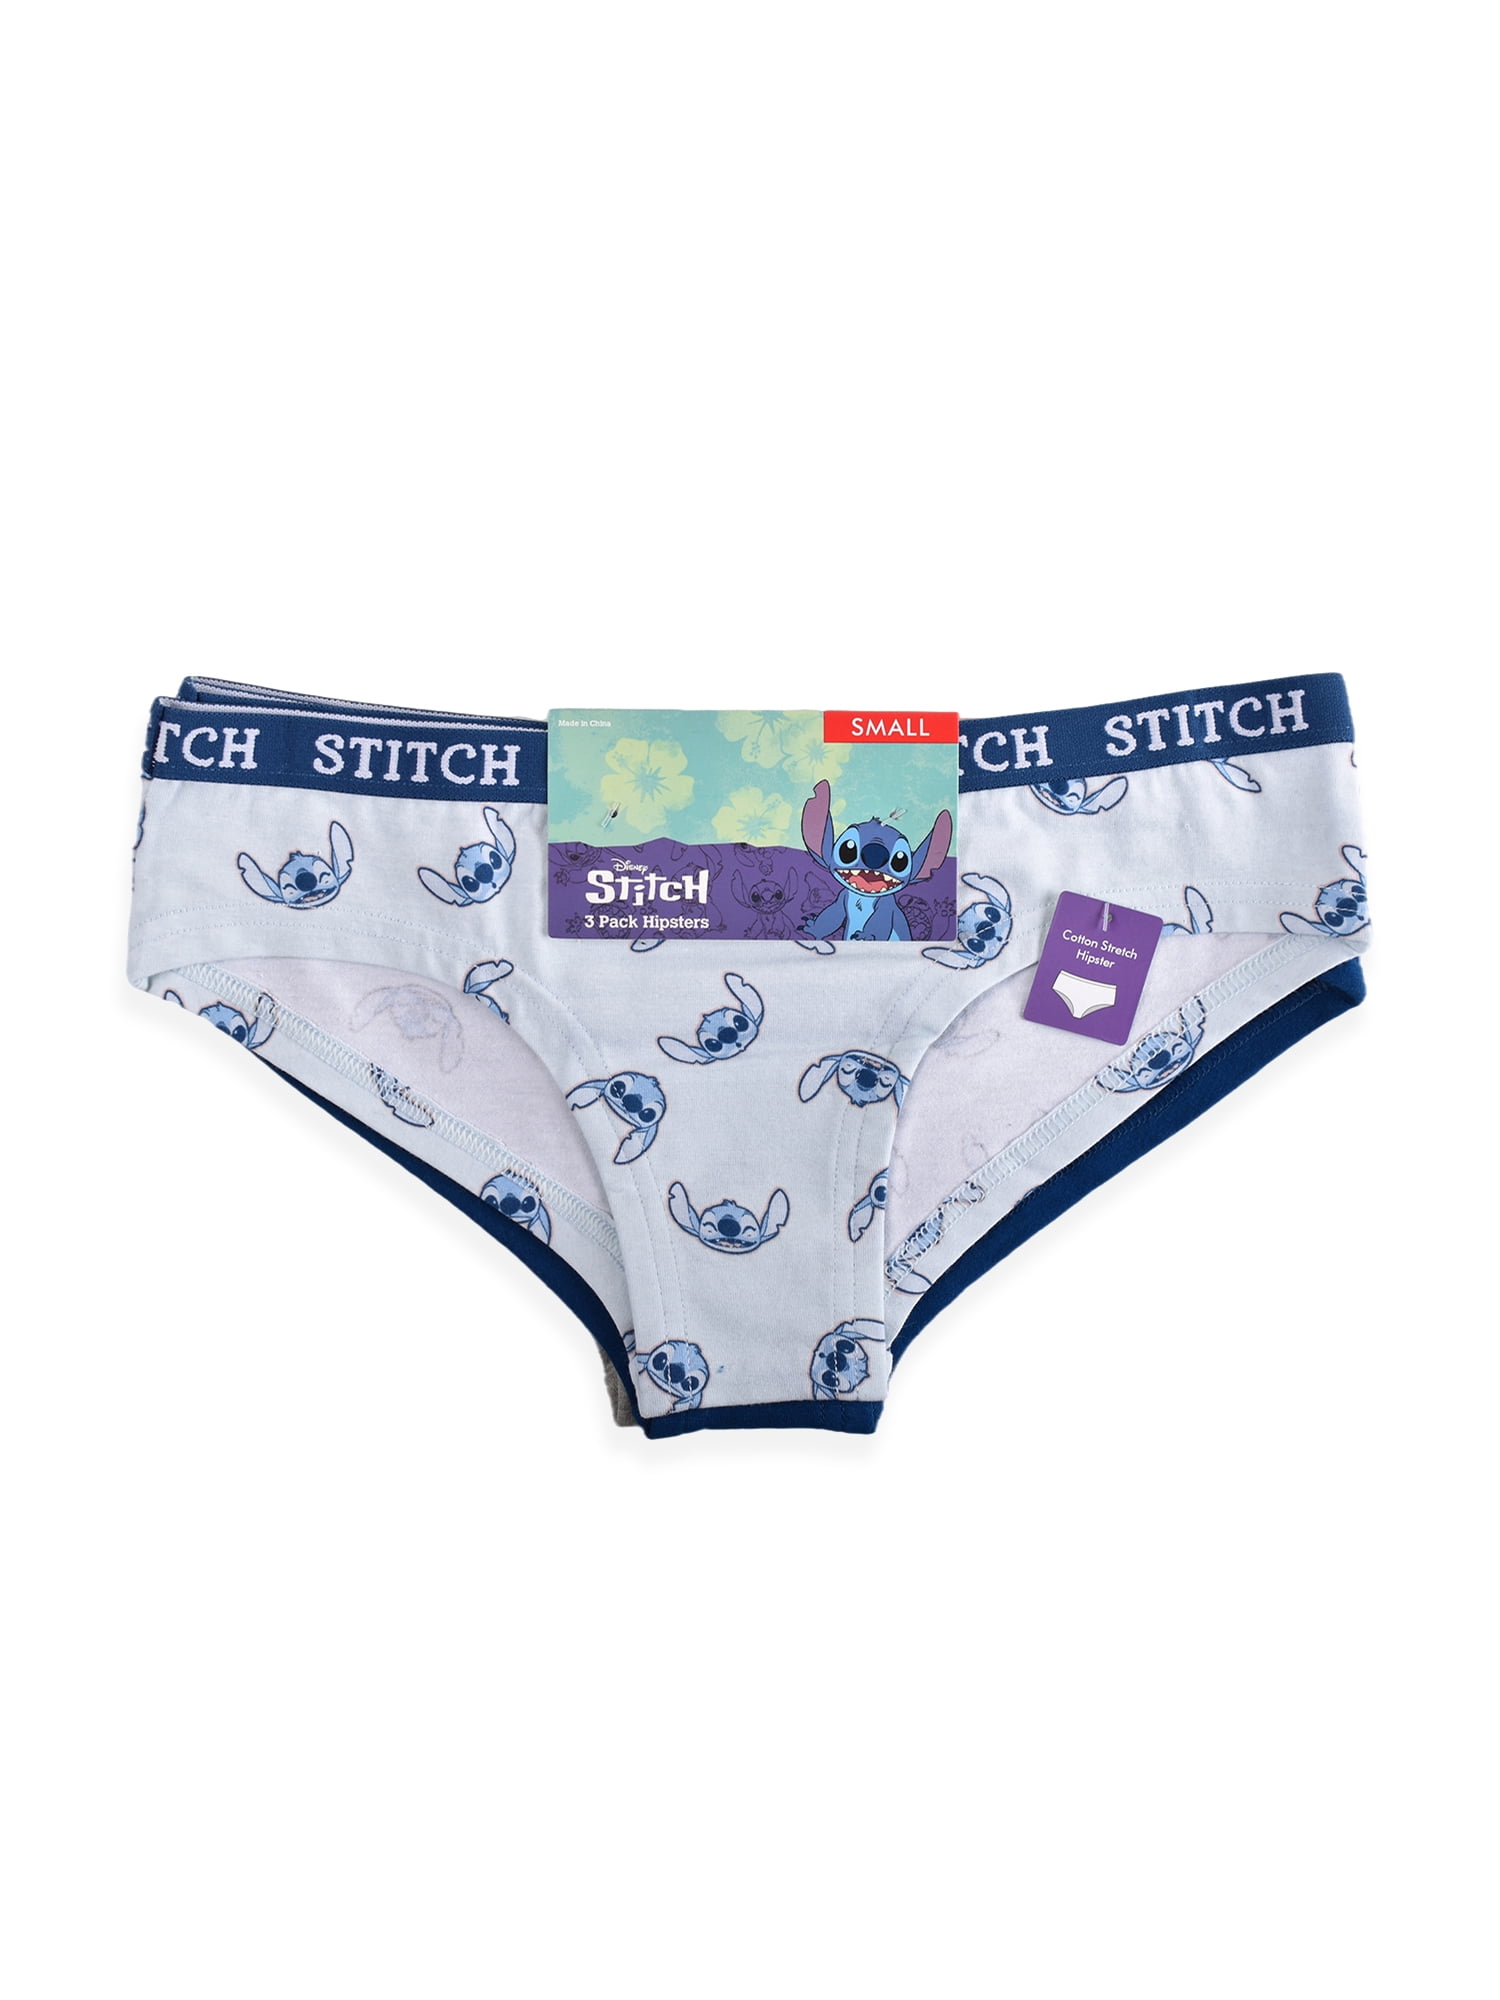 Disney Lilo & Stitch Girls 3PK Hipster Knickers, Pack of 3 Underwear -  Characterville